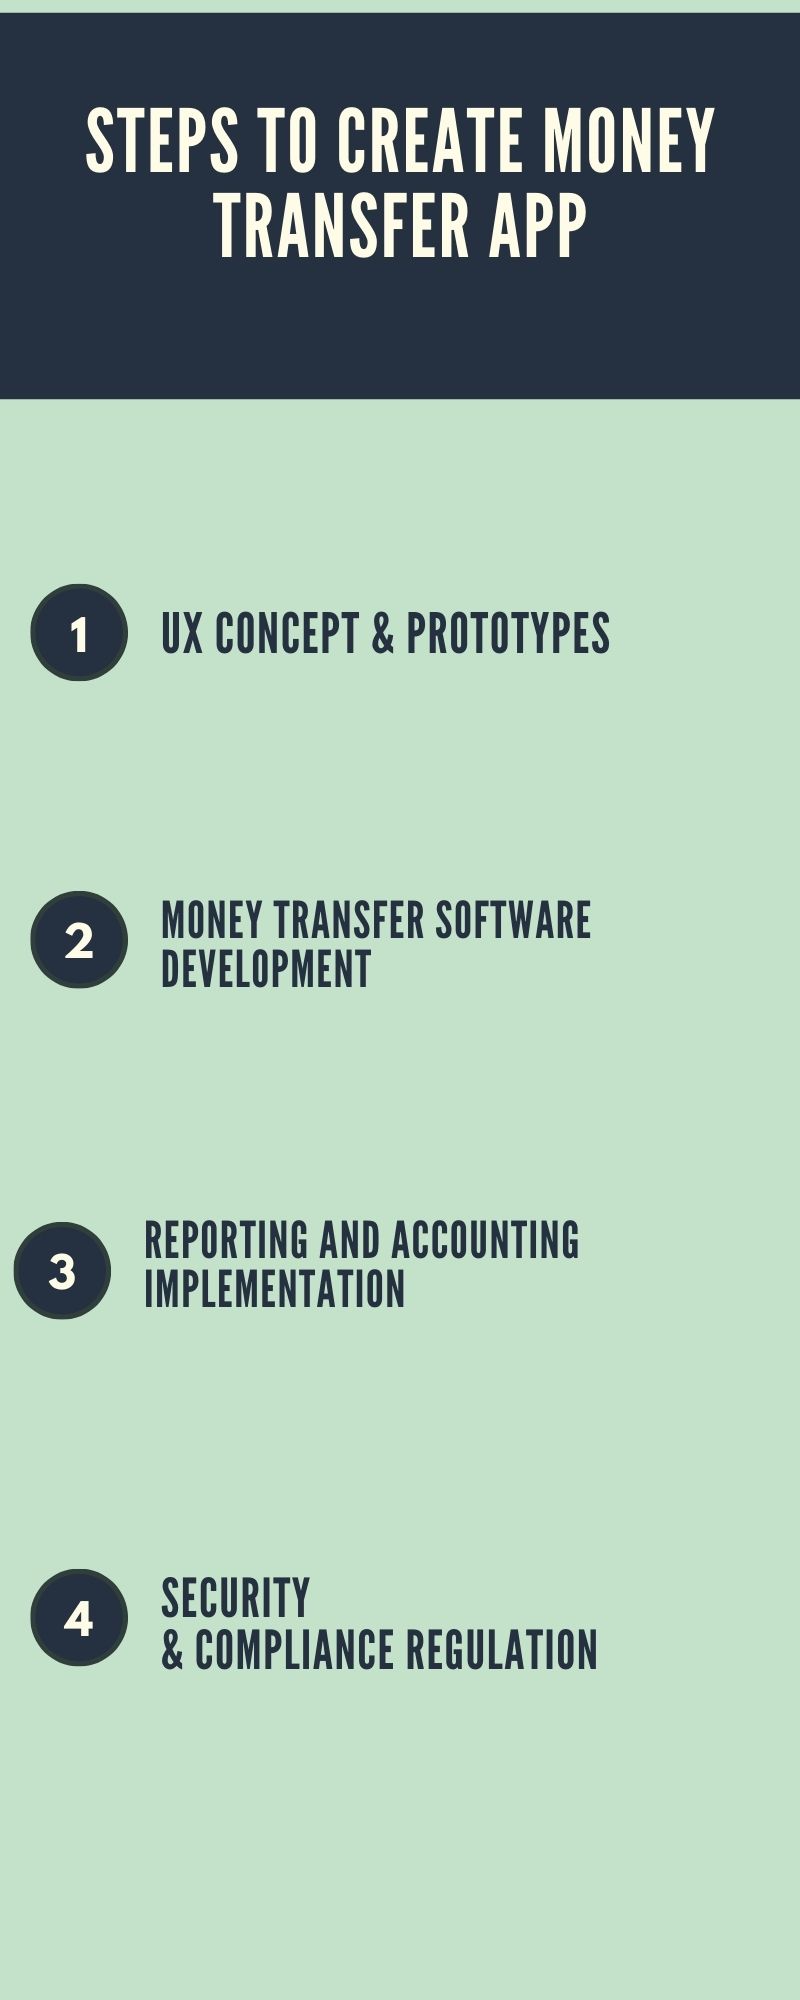 Steps to create money transfer software